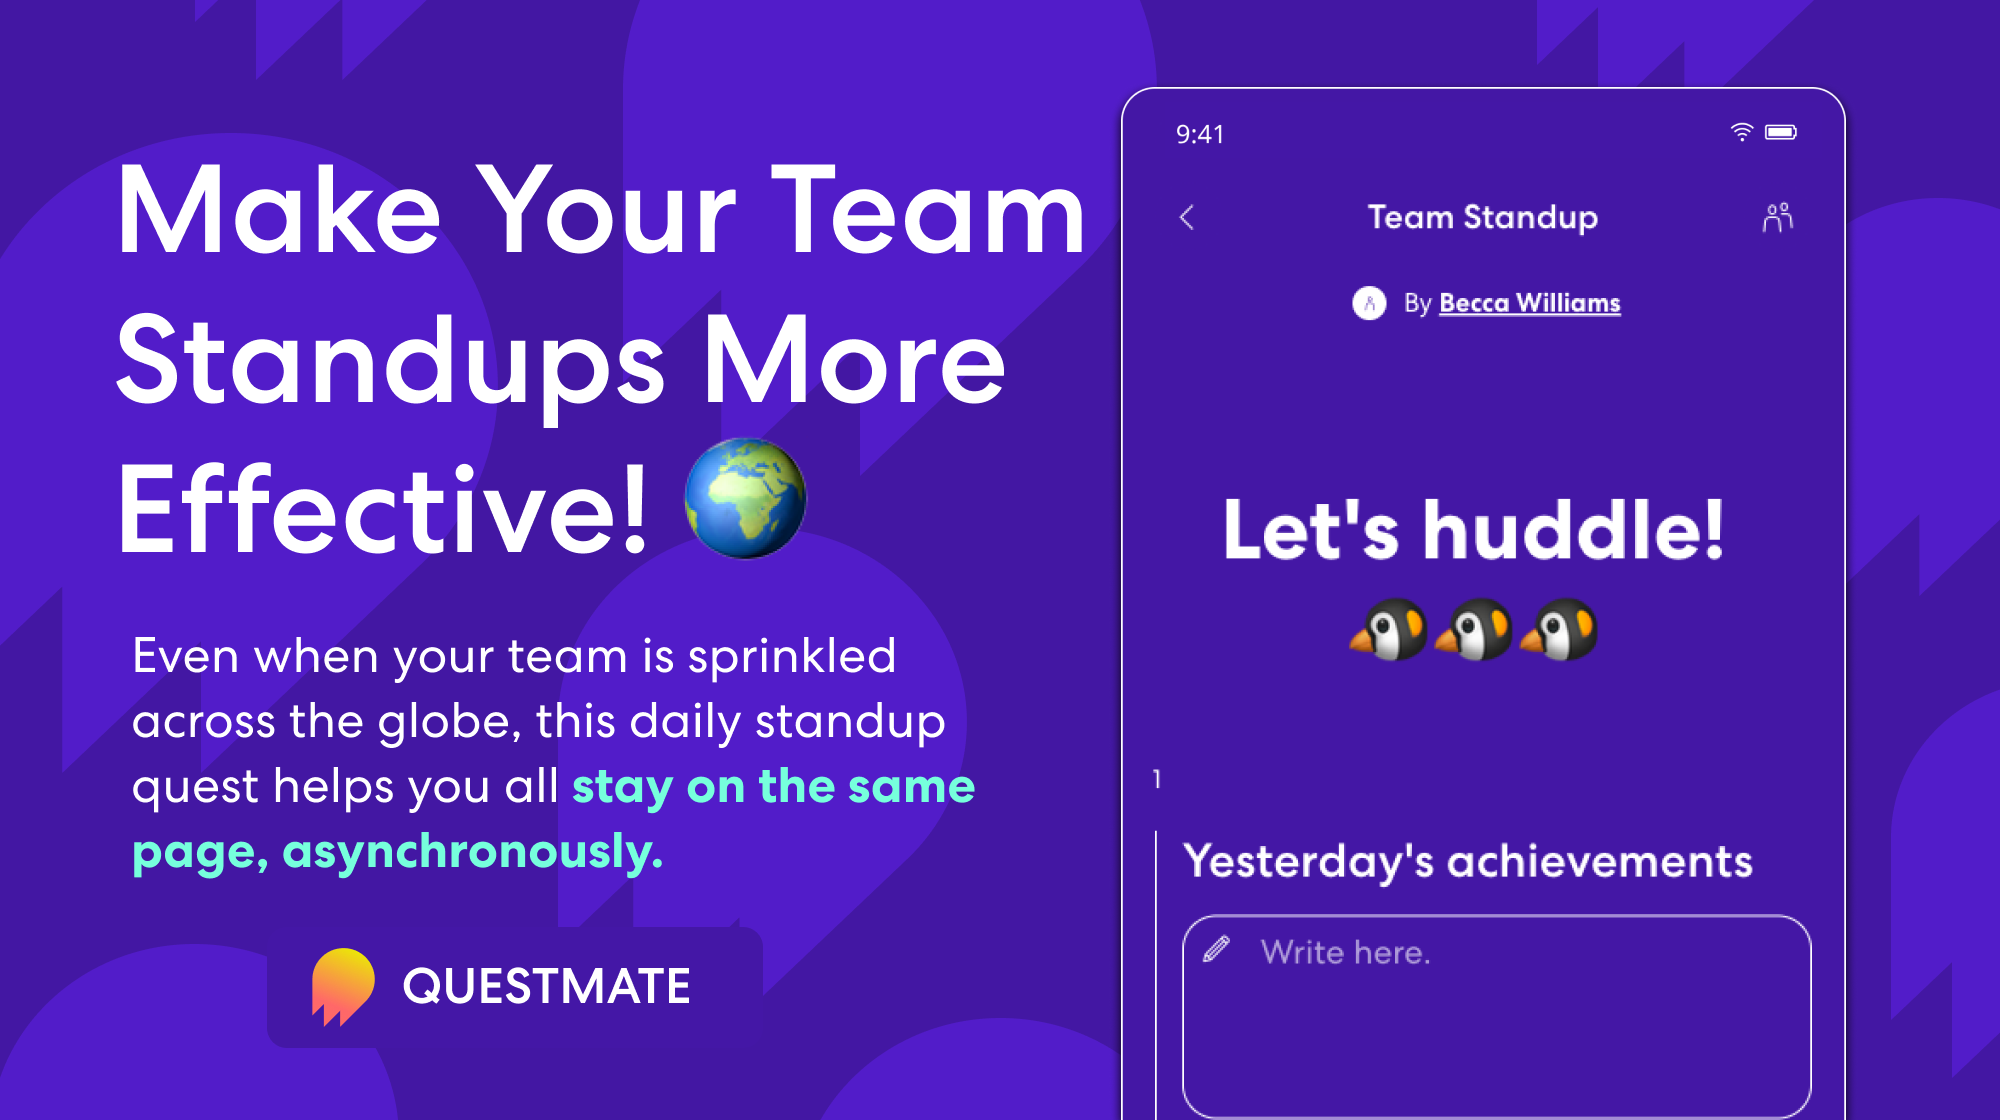 Make Your Team Standups More Effective! Even when your team is sprinkled across the globe, this daily standup quest helps you all stay on the same page, asynchronously.